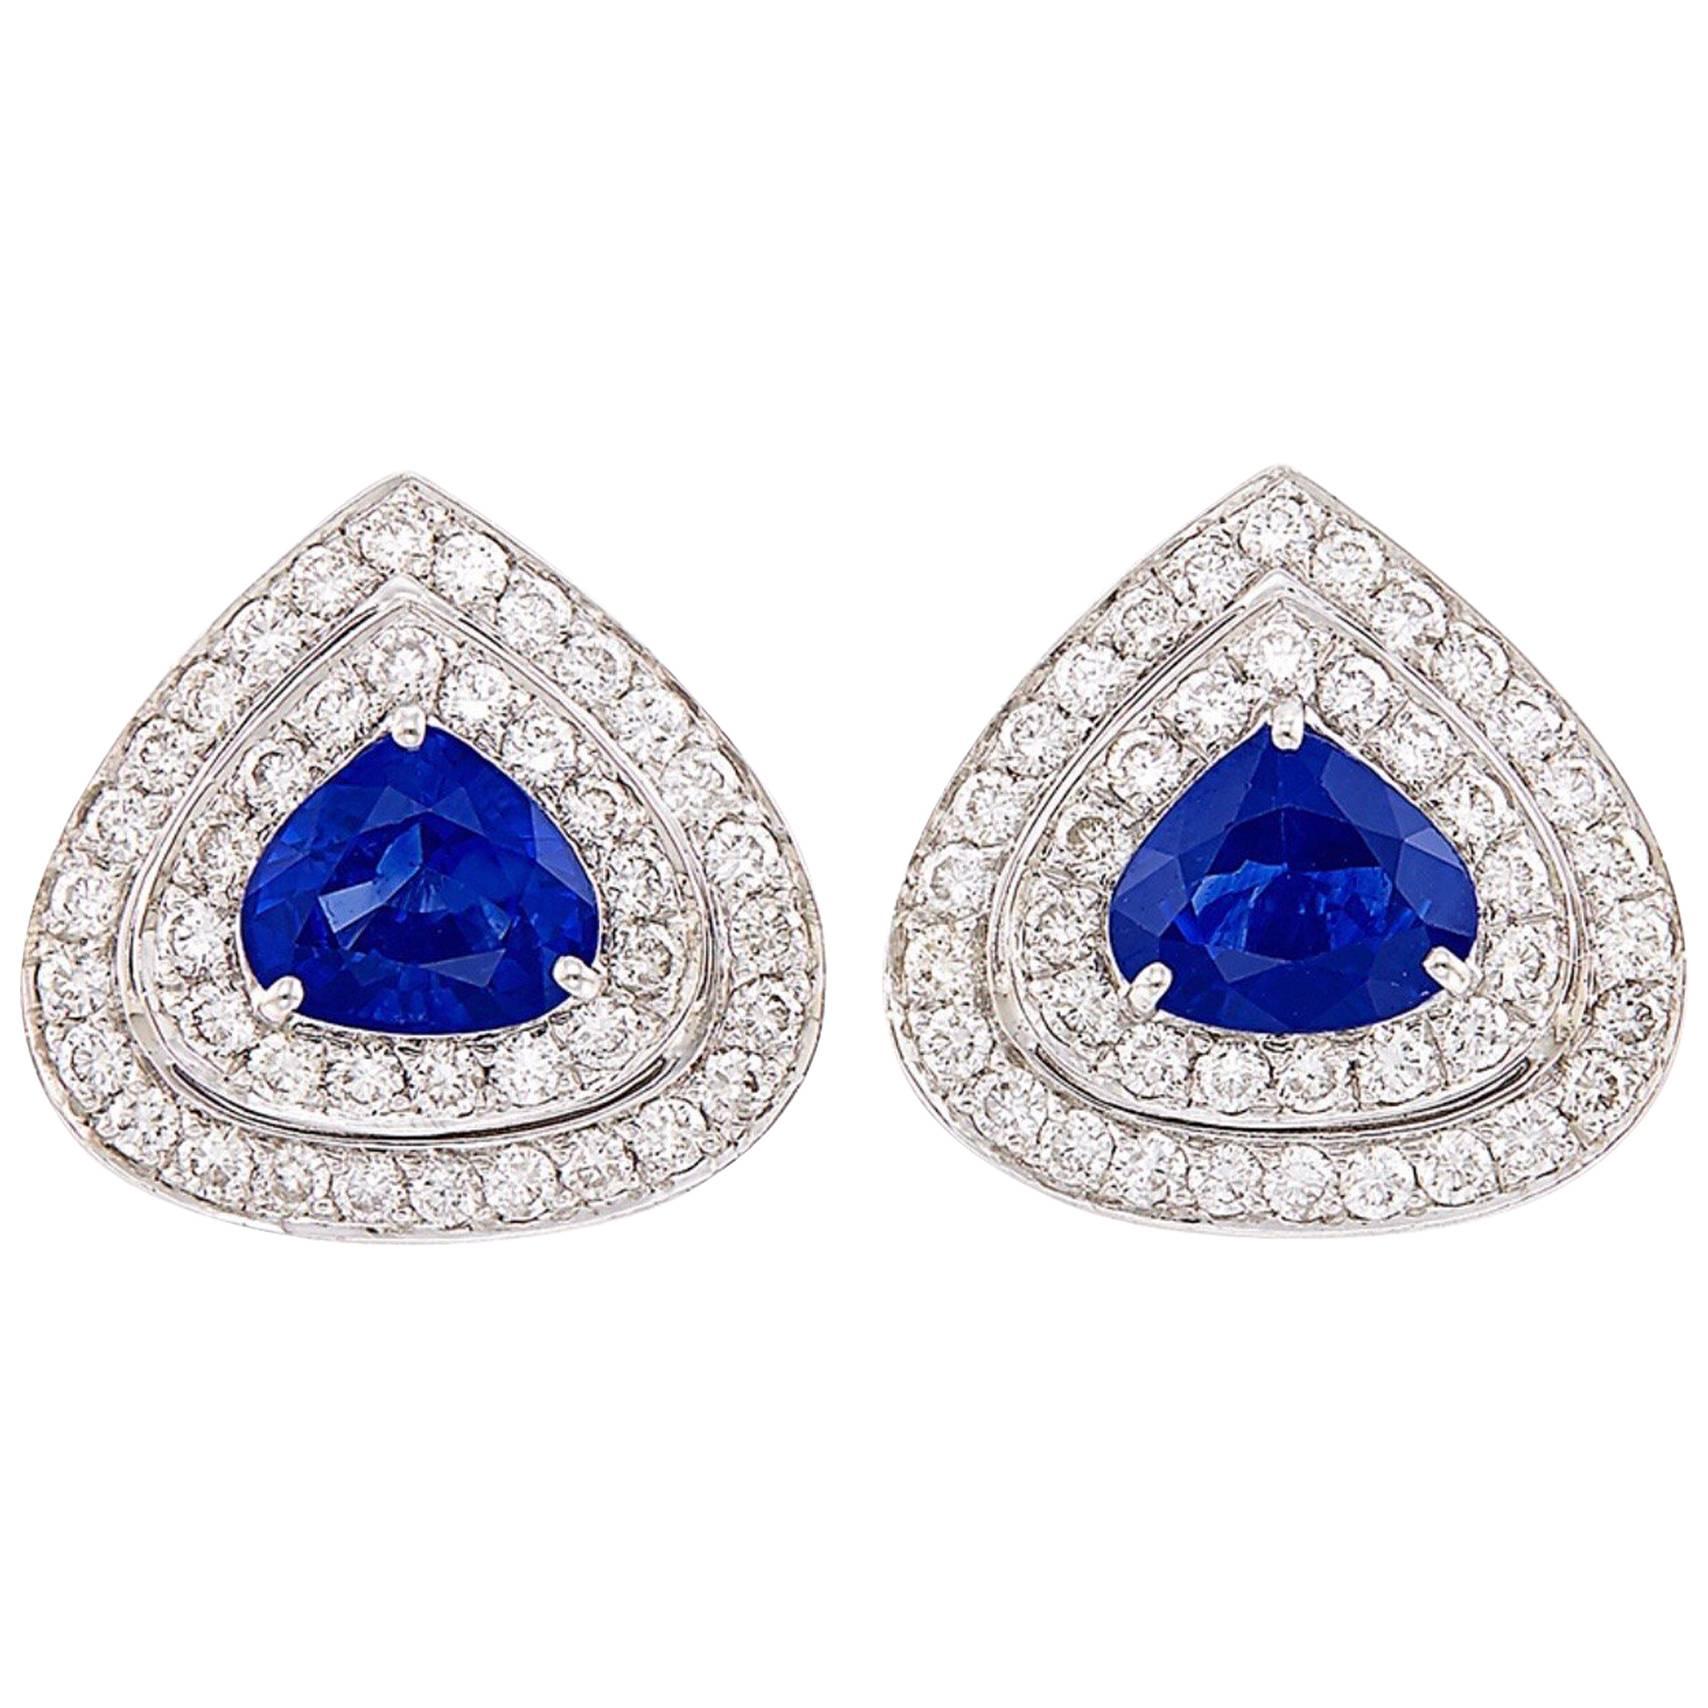 3.76 Carat Sapphire, White Gold and Diamond Clip-On Earrings